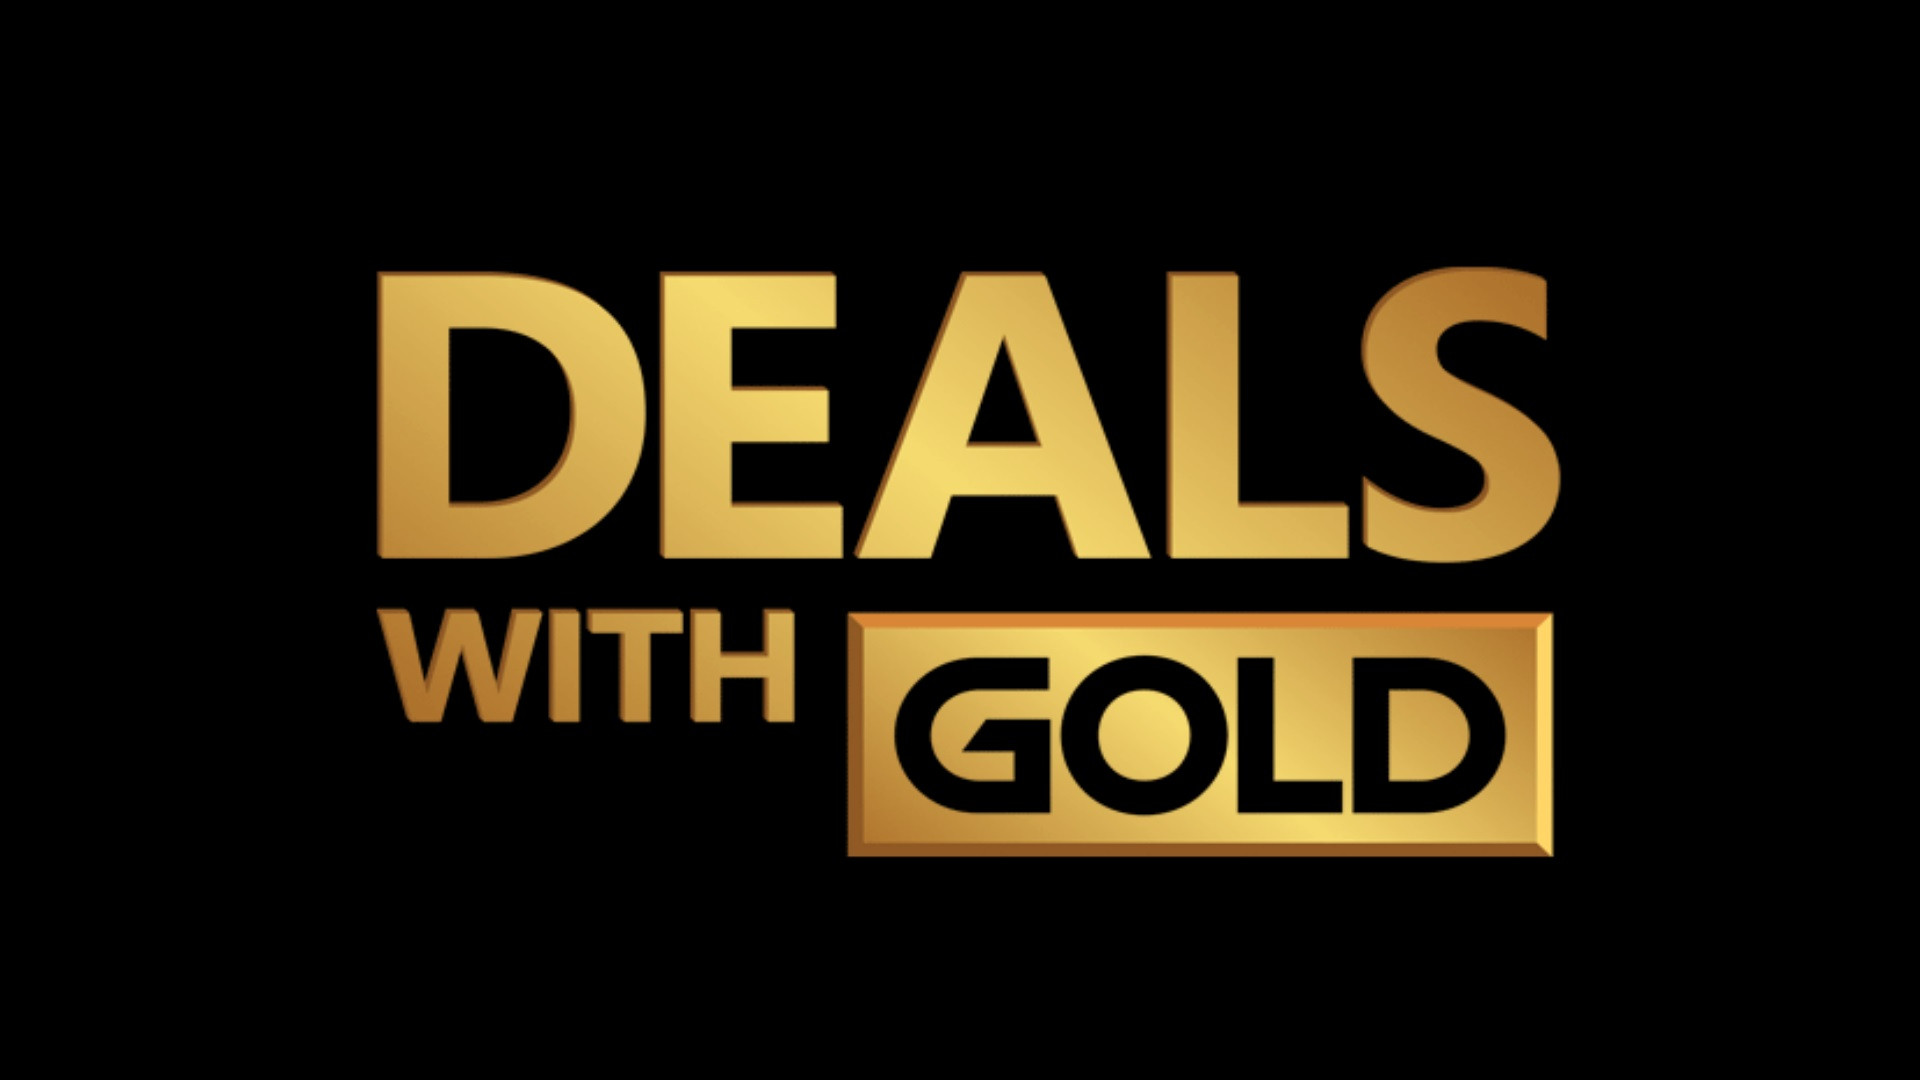 Deals with Gold semaine 45